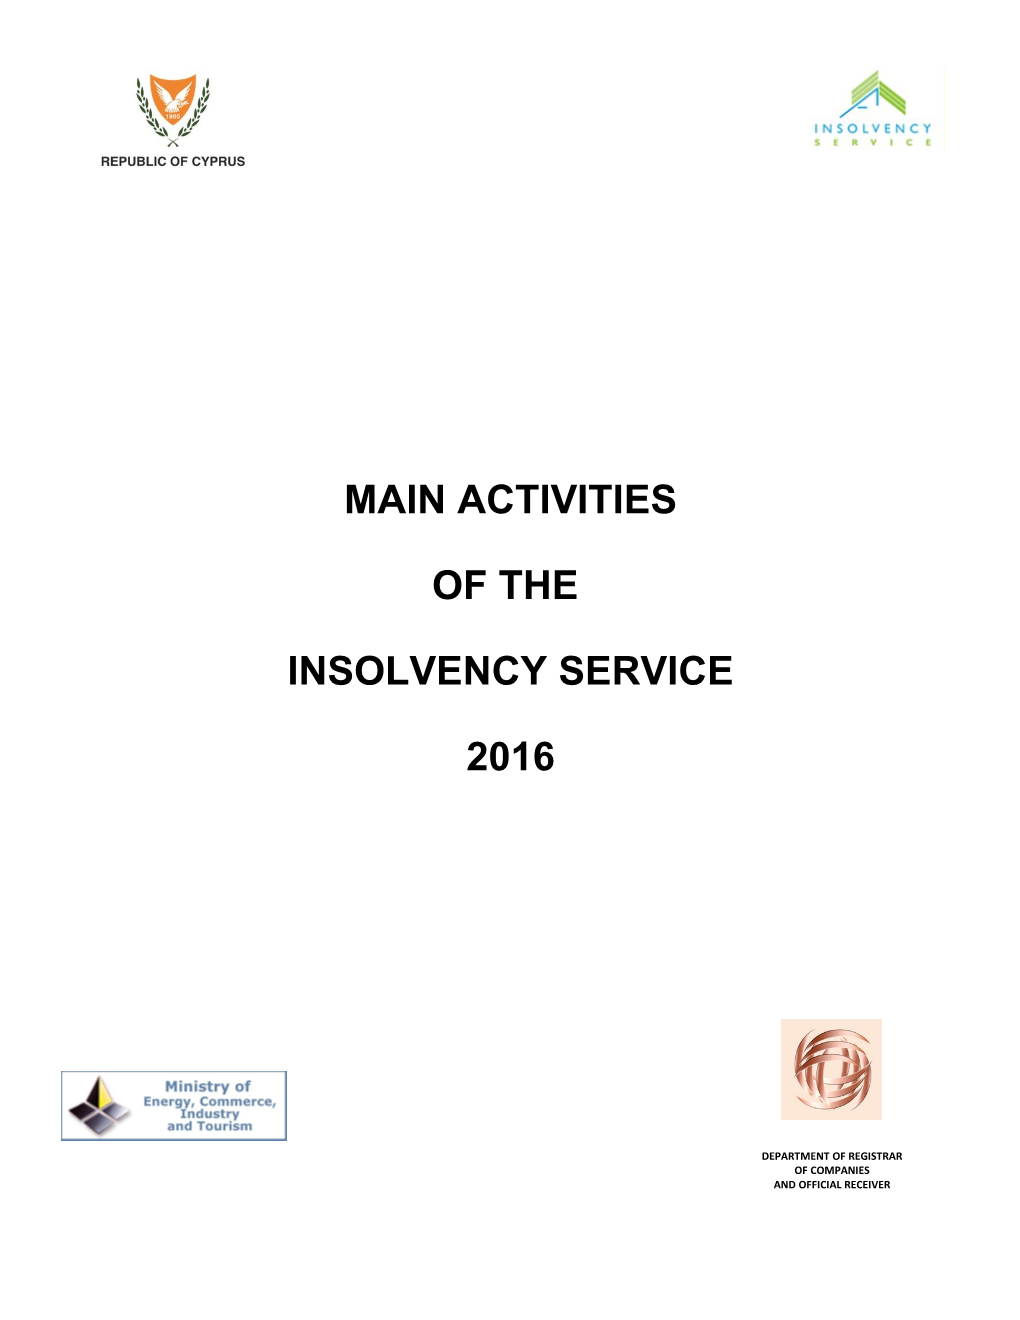 Insolvency Service / Bankruptcies and Liquidations Section